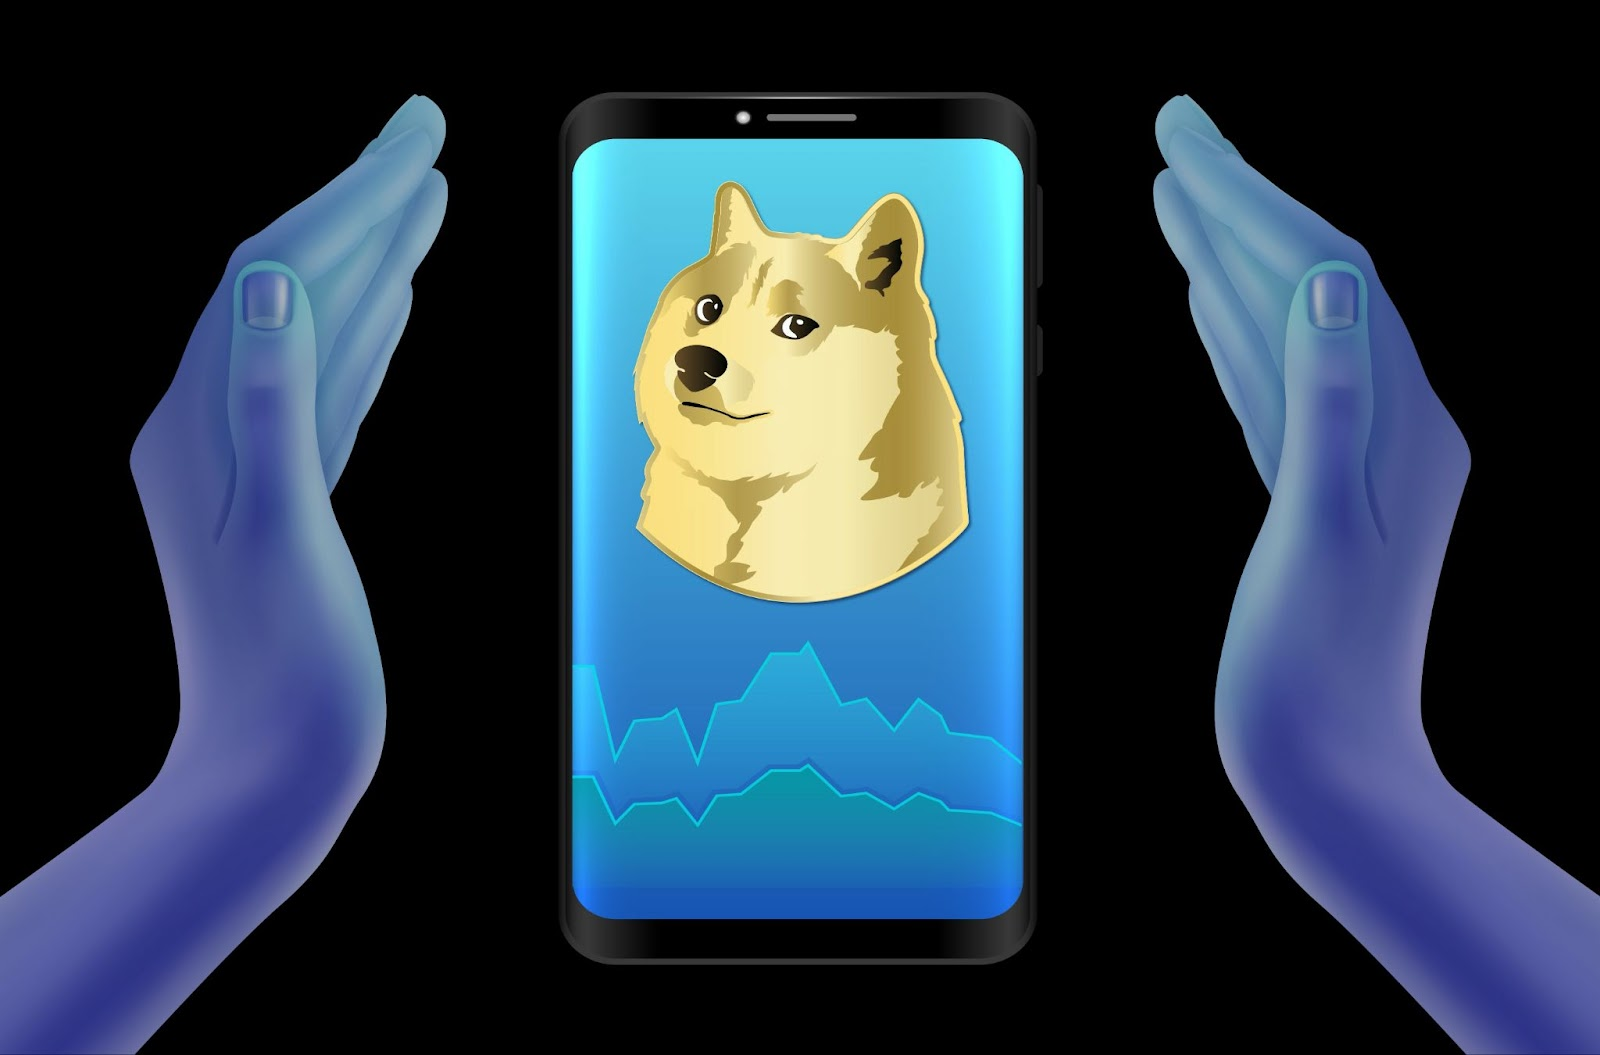 Dogecoin (DOGE) Price Eyes A Quick 8% Move As Meme Coin Fever Grips Investors